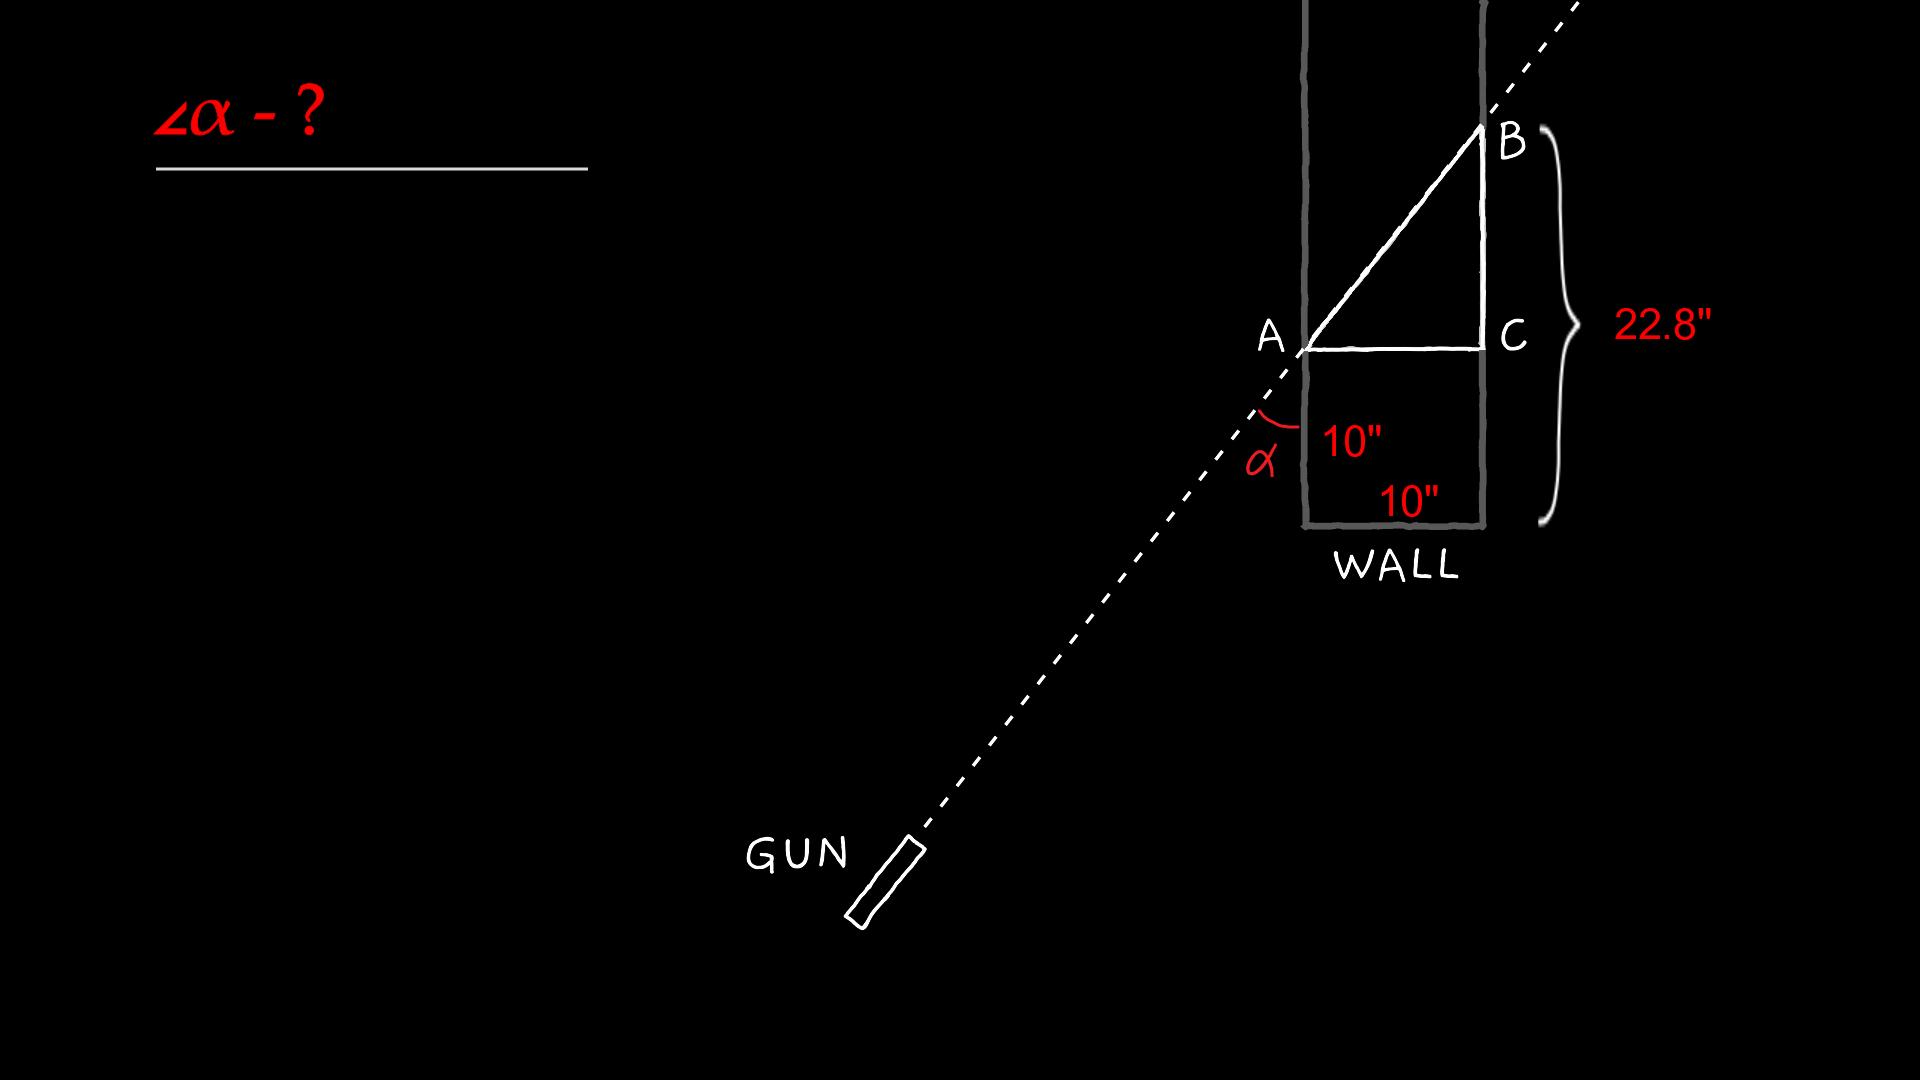 Top view of the shooting scene with the bullet path forming a hypotenuse AB in the right triangle ABC, where AC and BC are the legs.